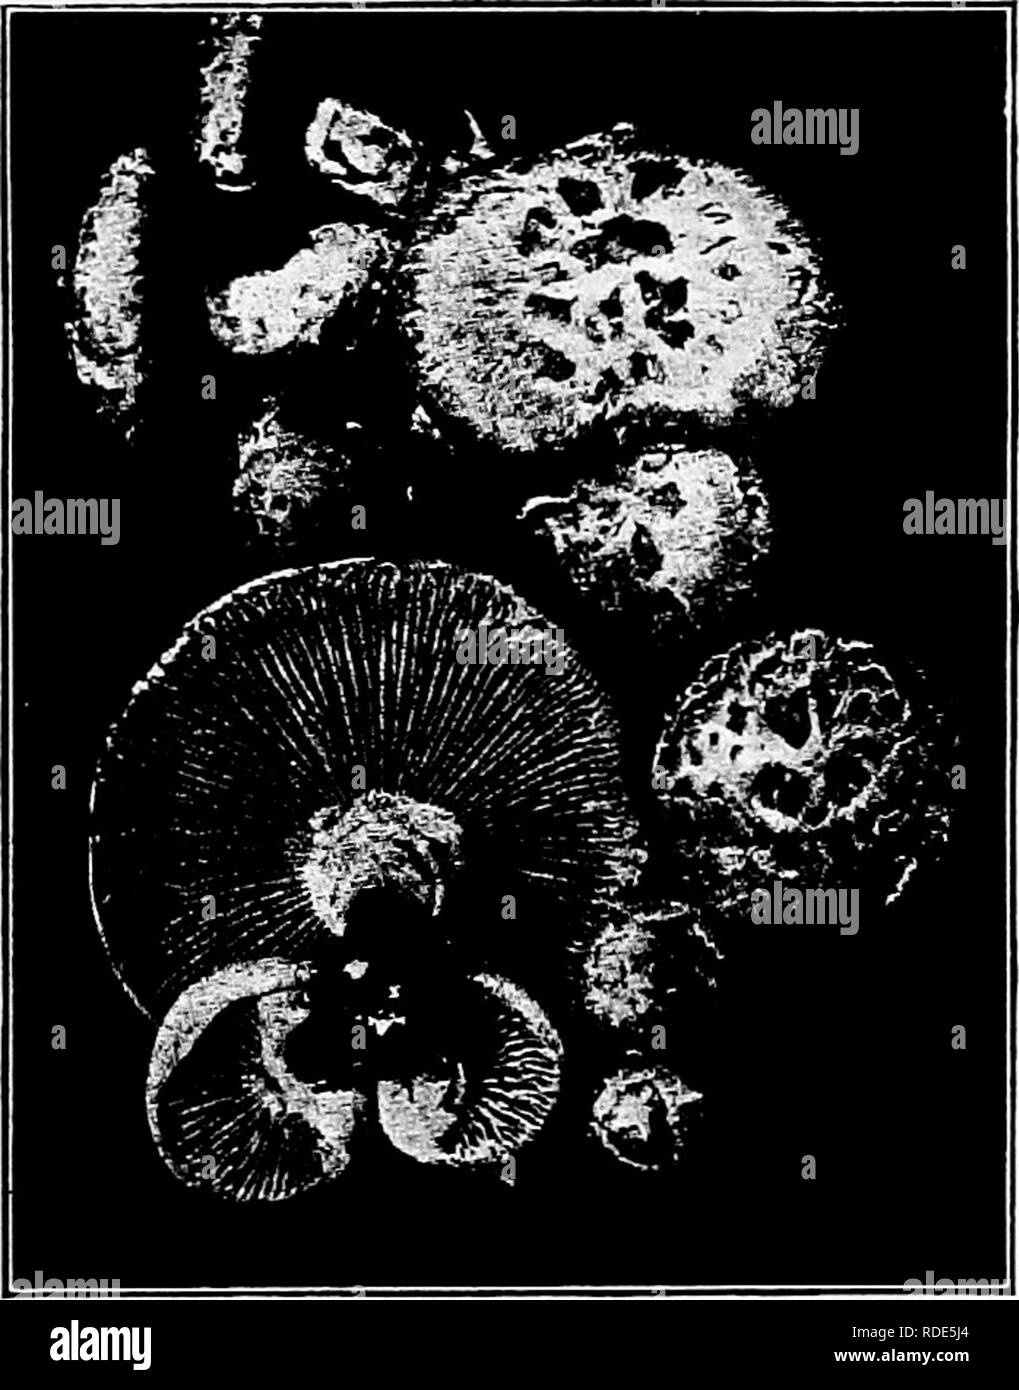 . The fungi which cause plant disease . Plant diseases; Fungi. 446 THE FUNGI ^^â H1CH CAUSE PLANT DISEASE L. conchatus (Bui.) Schr. is found on birch, poplar, aspen. L. lepideus '^^ Fr. on pine, birch, etc.. Fig. 017.âLentinus lepideus. After Clements. Panus Fries (p. 445) This genus is very close to Lentinus from which it is separated by the character of the gills which have an entire edge. P. stipicus (Bui.) Fr. is perhaps parasitic occasionally.â¢ Marasmius Fries (p. 445) Sporophore tough, withering, often reviving in renewed moisture; pileus, with few exceptions, regular, thin, leathery, w Stock Photo